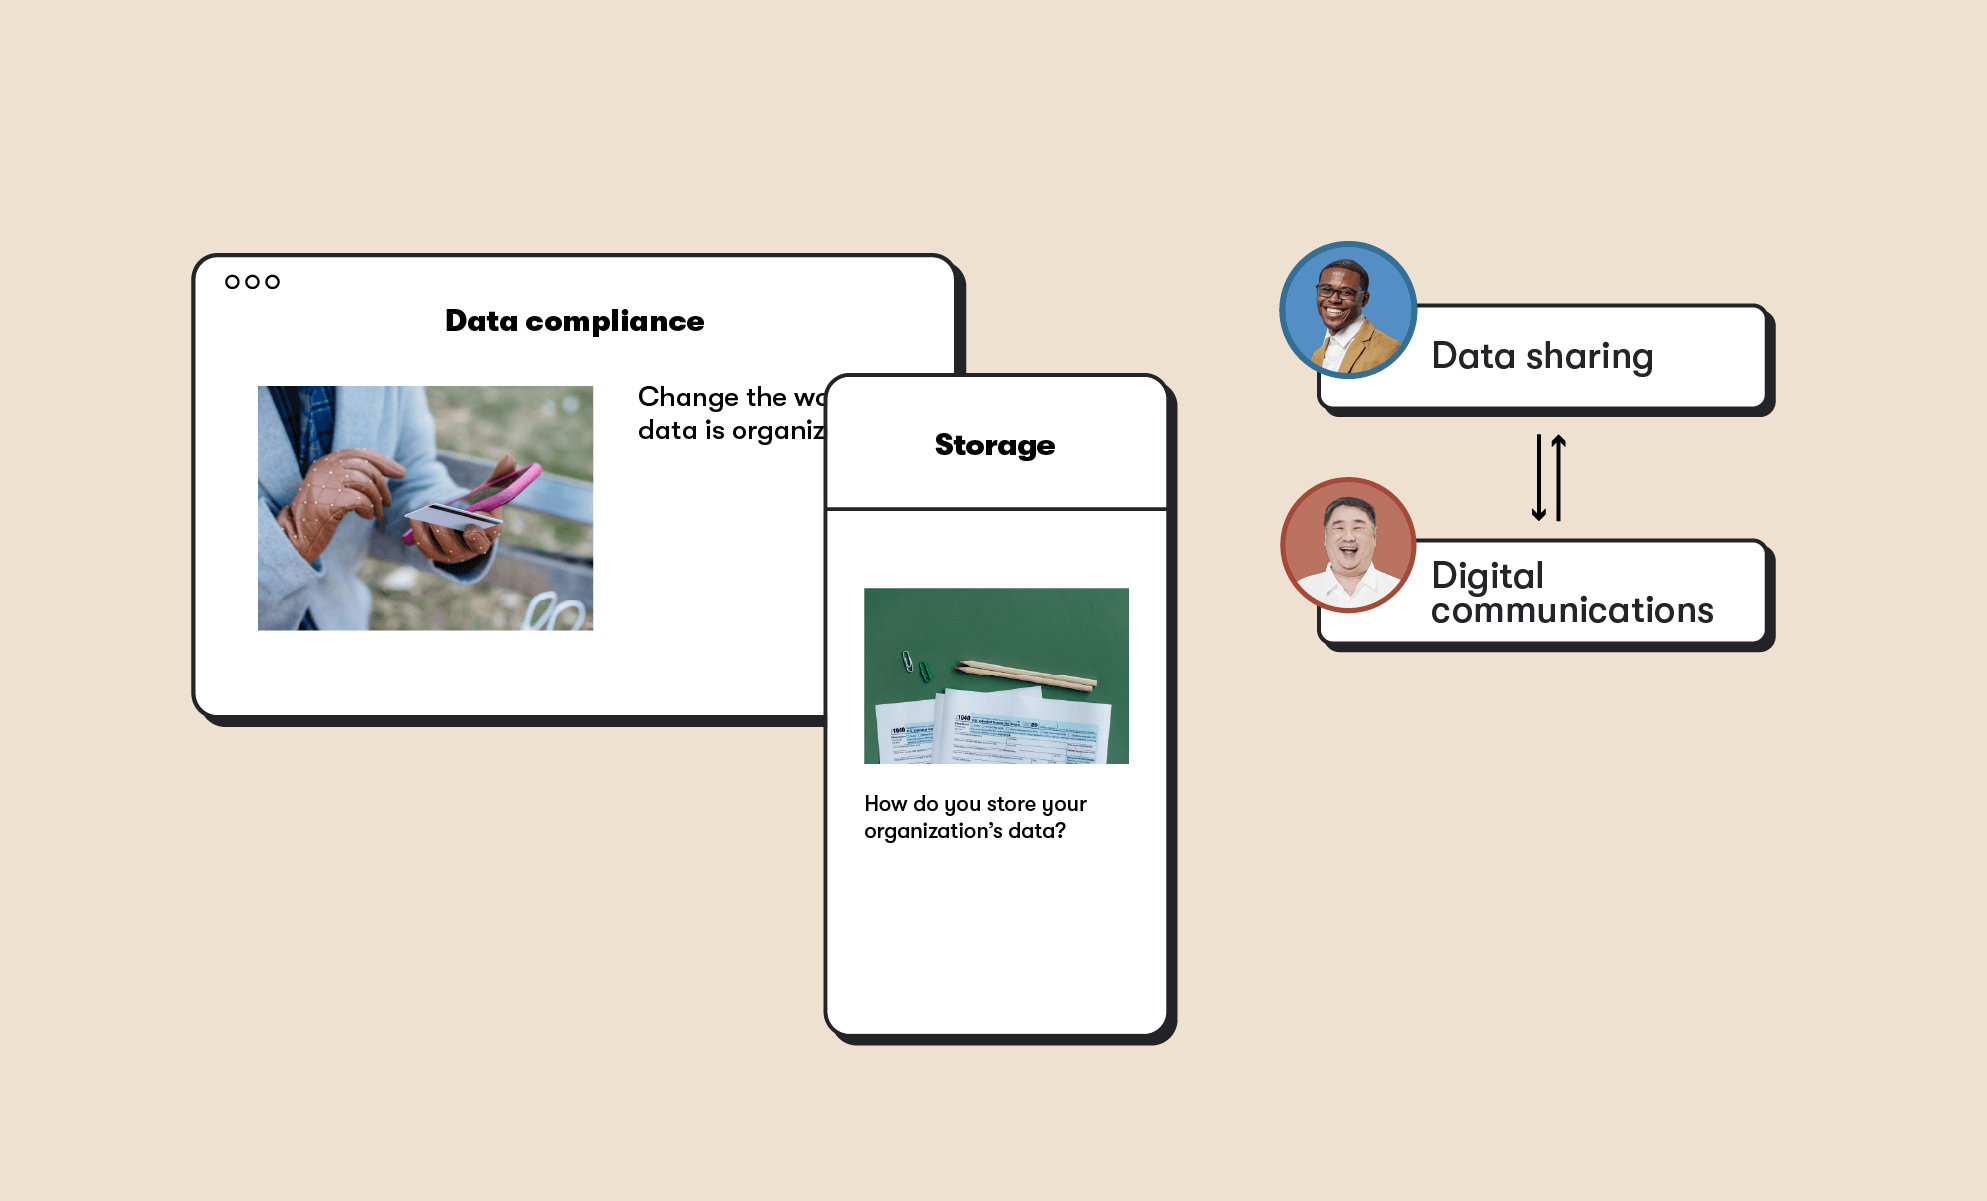 UI-style cards on a beige background, illustrating what data compliance is and how users store their data, as well as a graphic showing two types of CISOs working on data sharing and digital communications (BrainStorm, Inc. 9/2021)